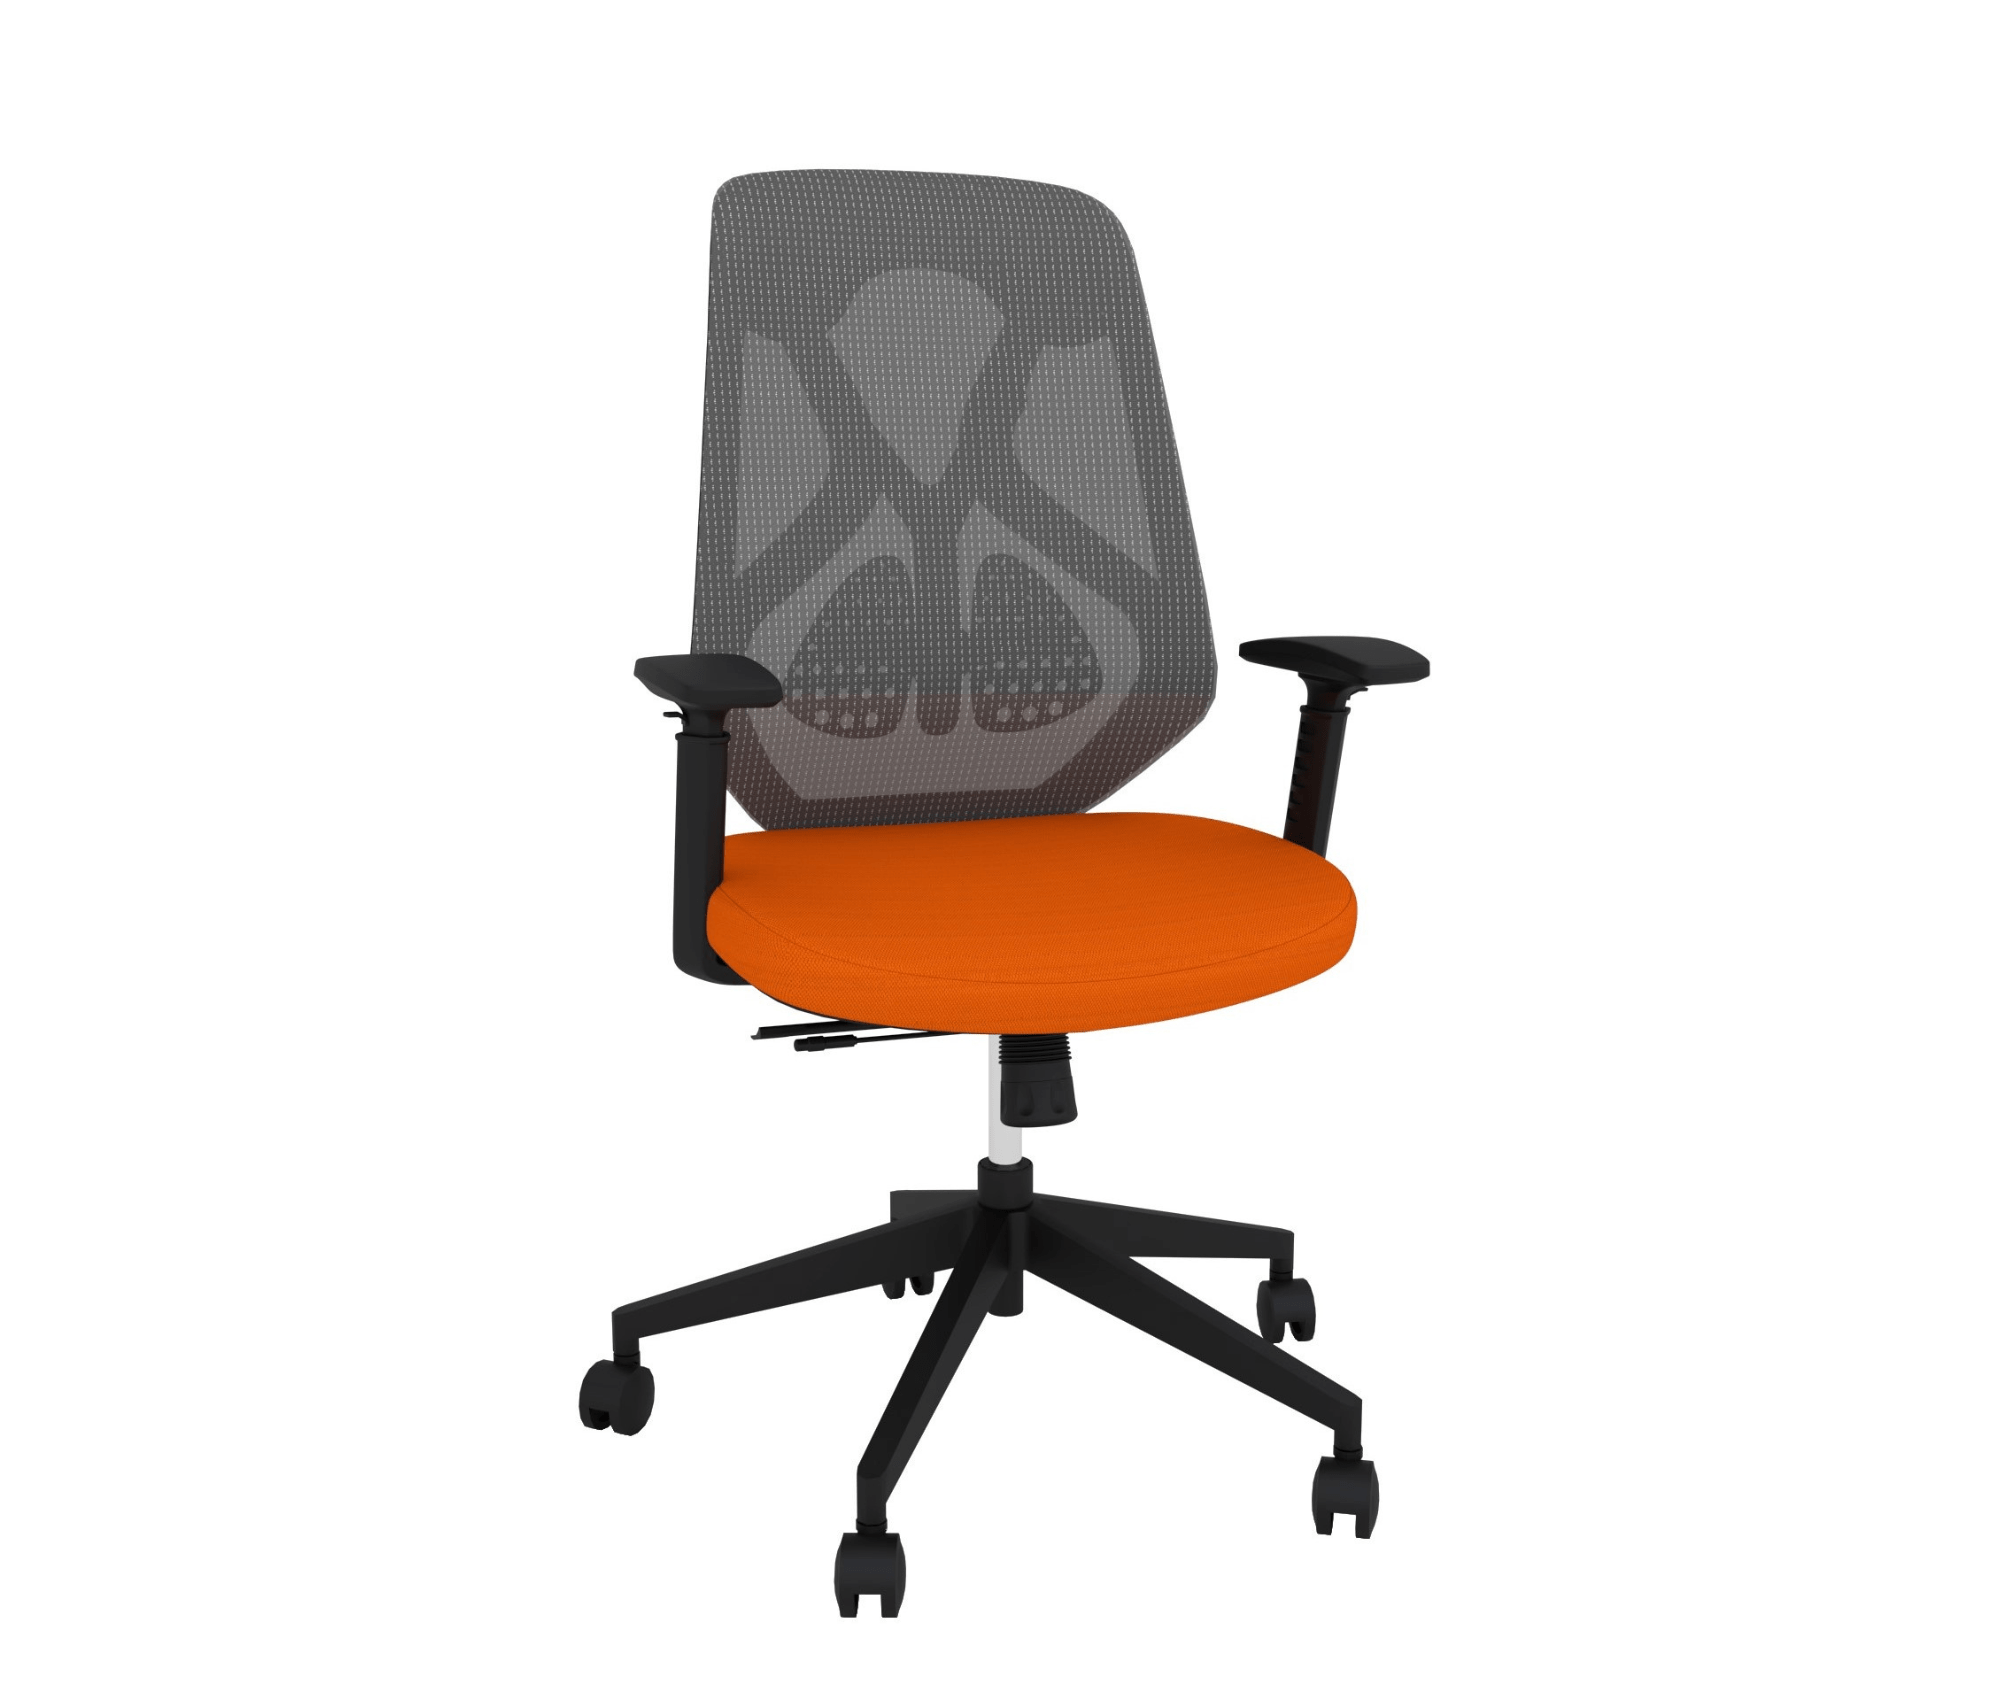 Ergonomic Chair | Office Chair with Adjustable Arms Porvata Office Chairs Bengal